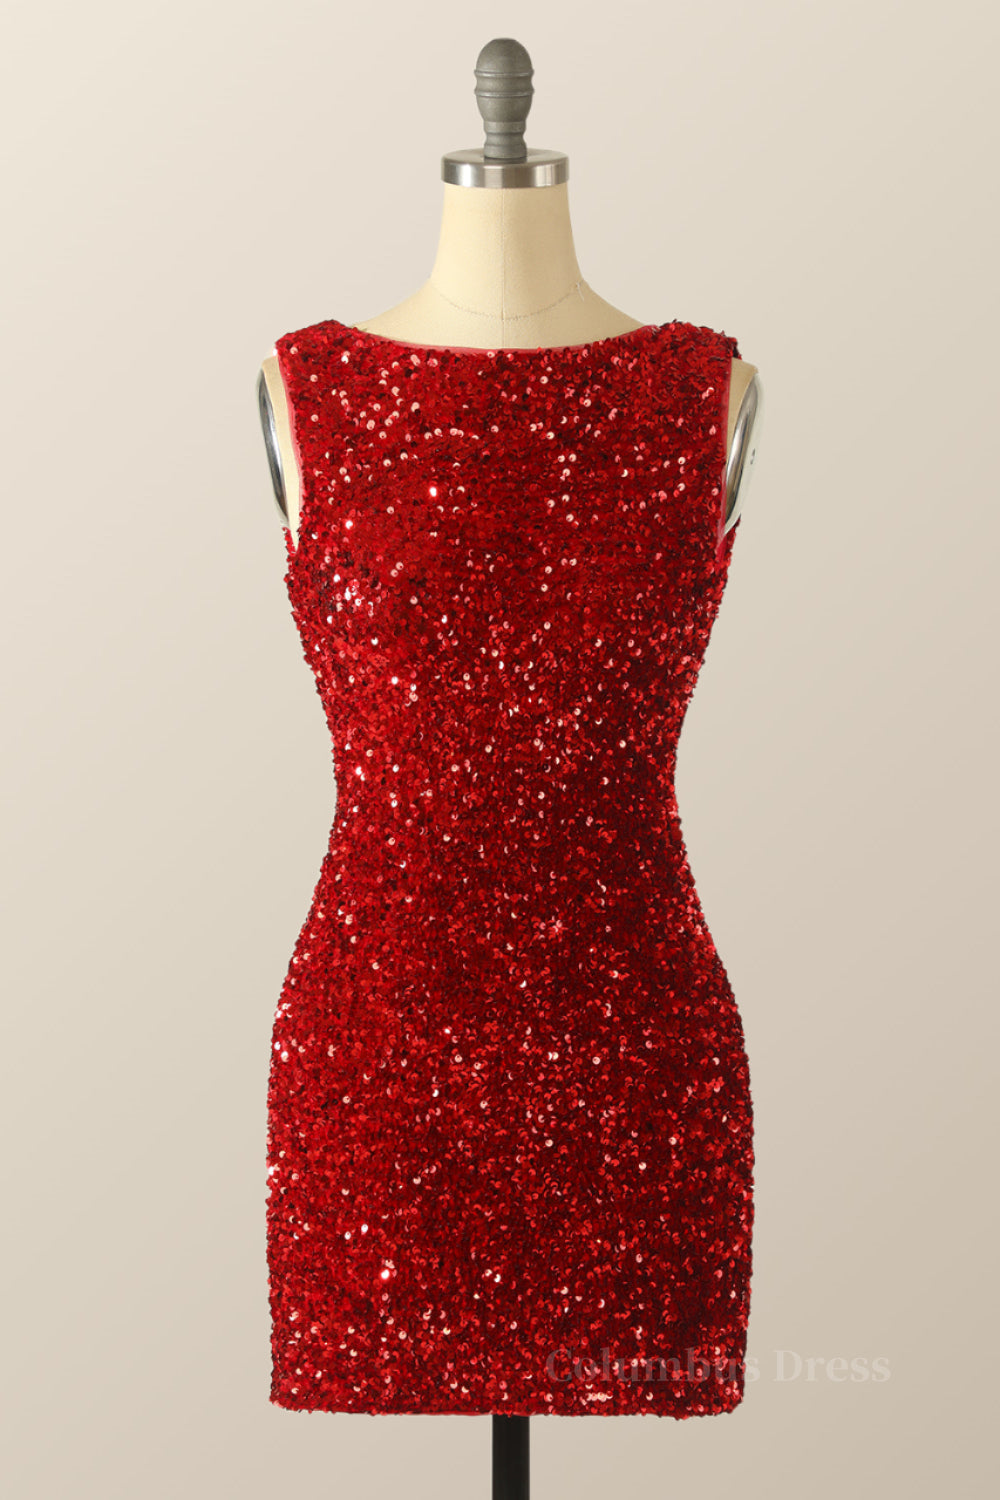 Homecoming Dresses Pink, Scoop Red Sequin Tight Mini Dress with Cowl Back